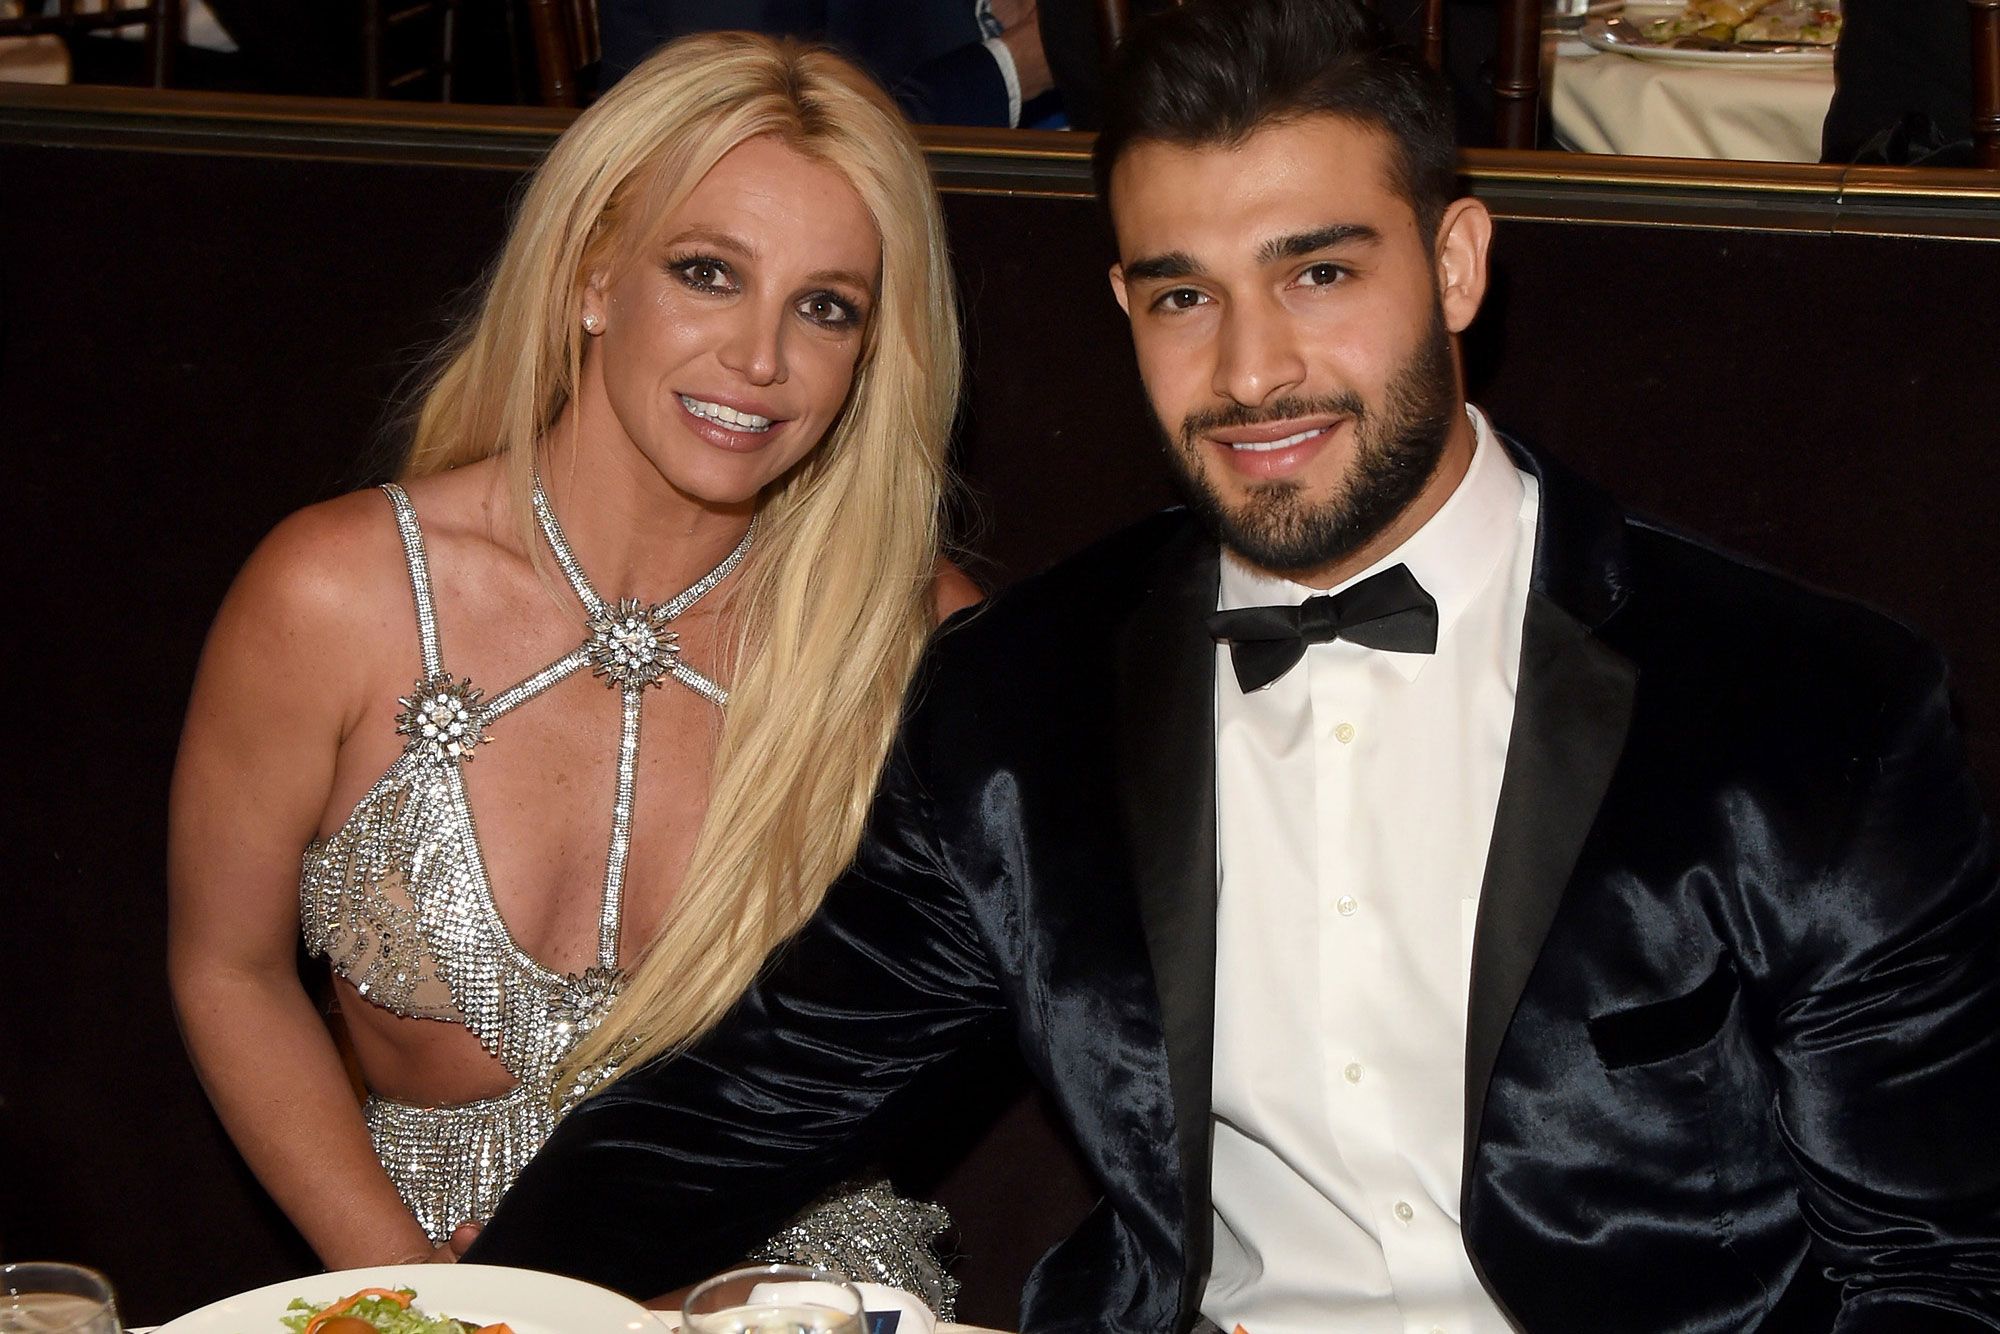 Britney Spears Gushes that her Engagement to Sam Asghari Was ‘Overdue’ Yet ‘Worth the Wait'